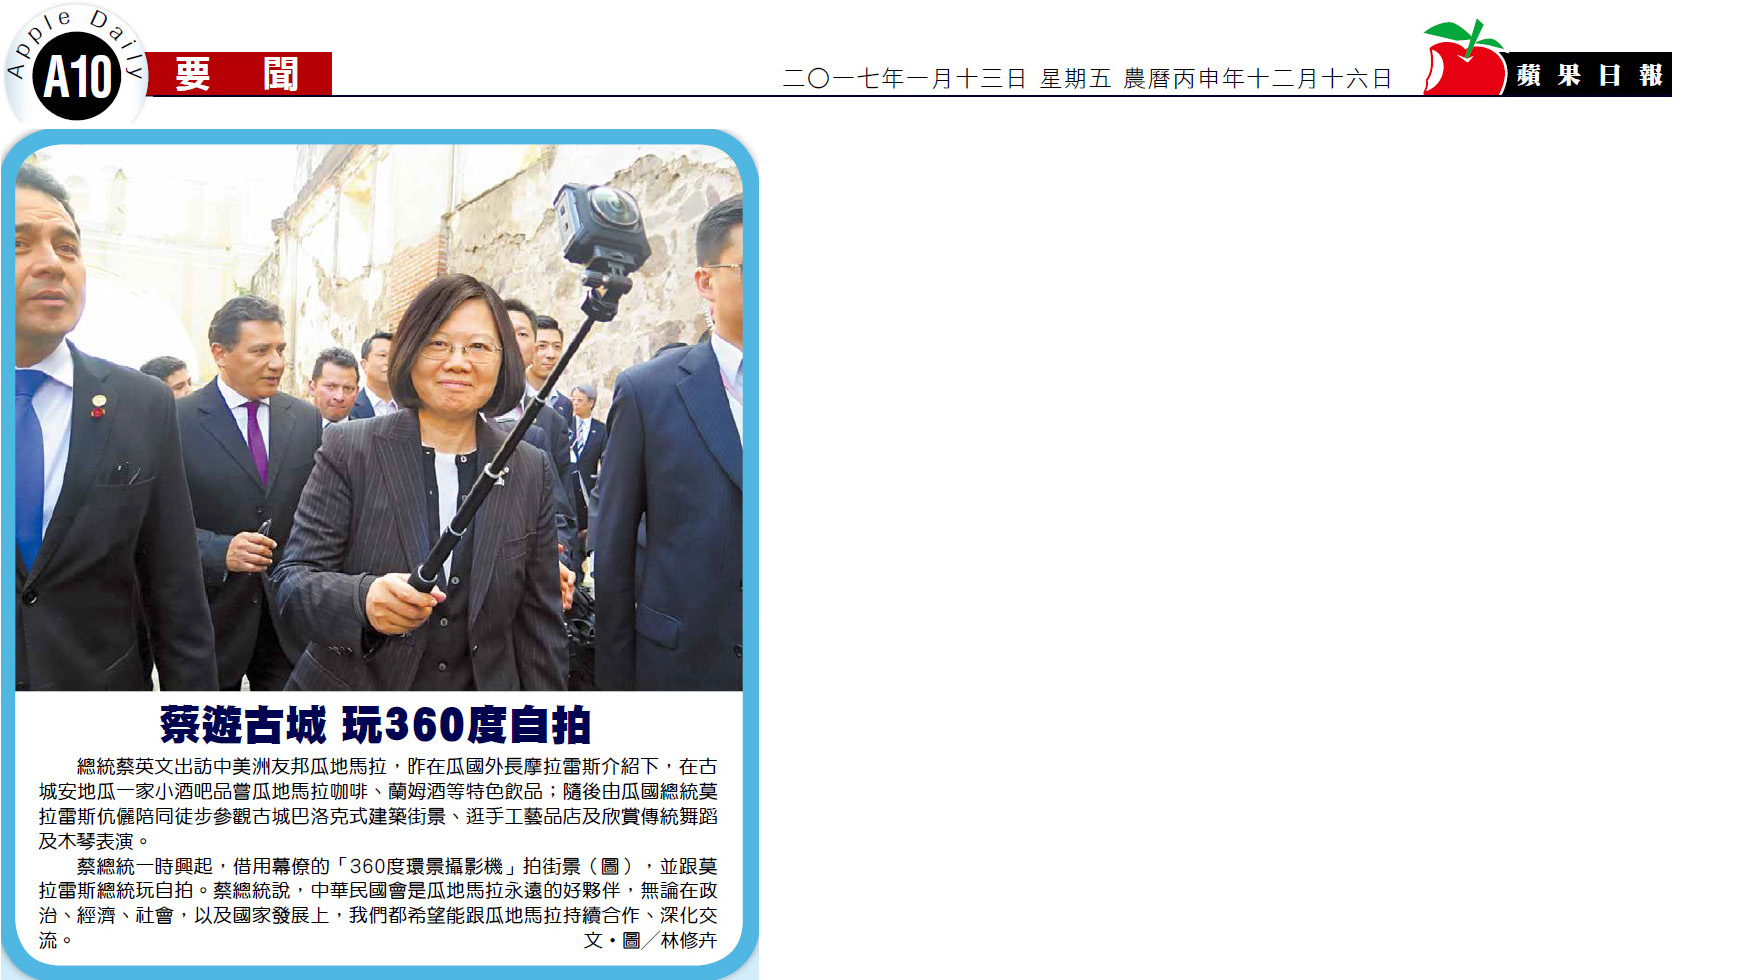 President Tsai tours old town and takes selfie with 360-degree camera